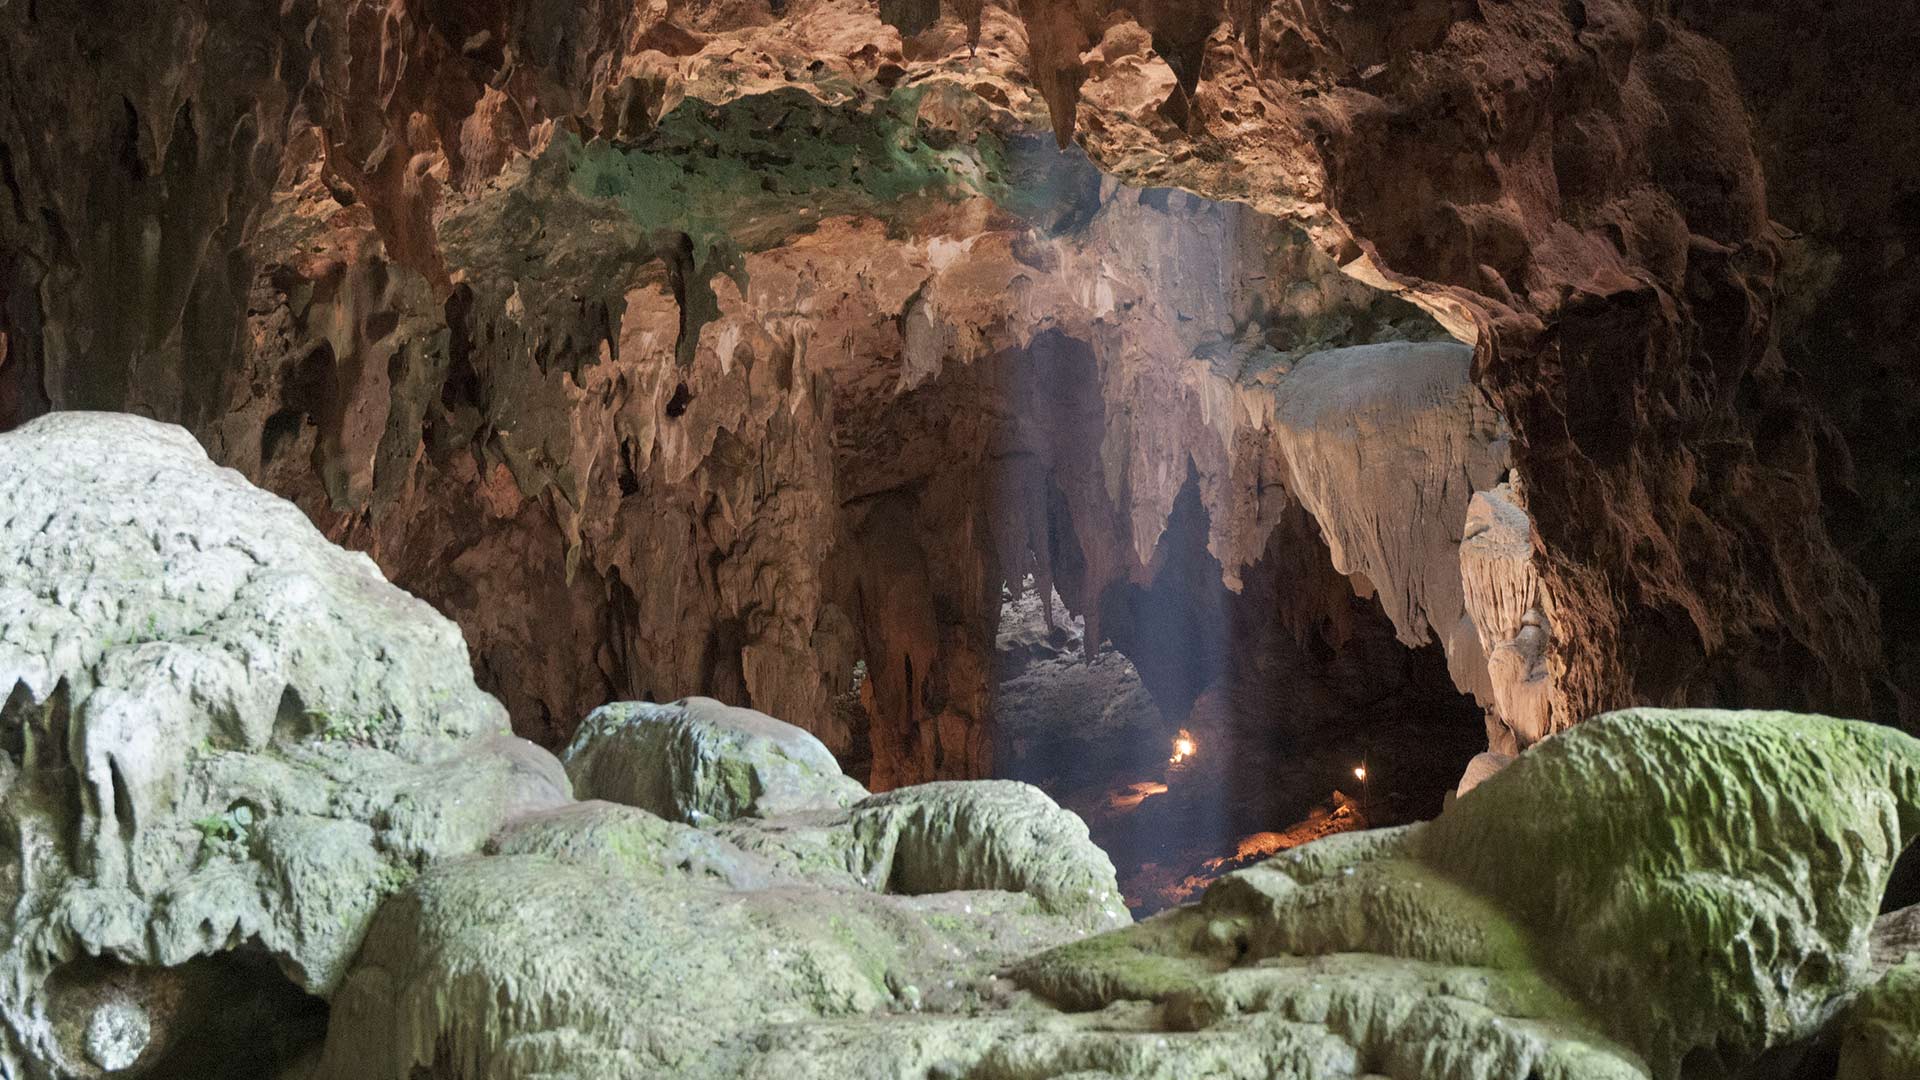 Callao Cave (Luzon Island, Philippines), where the fossils of Homo luzonensis were discovered. This view is taken from the rear of the first chamber of the cave (where the fossils were found), in the direction of the second chamber.